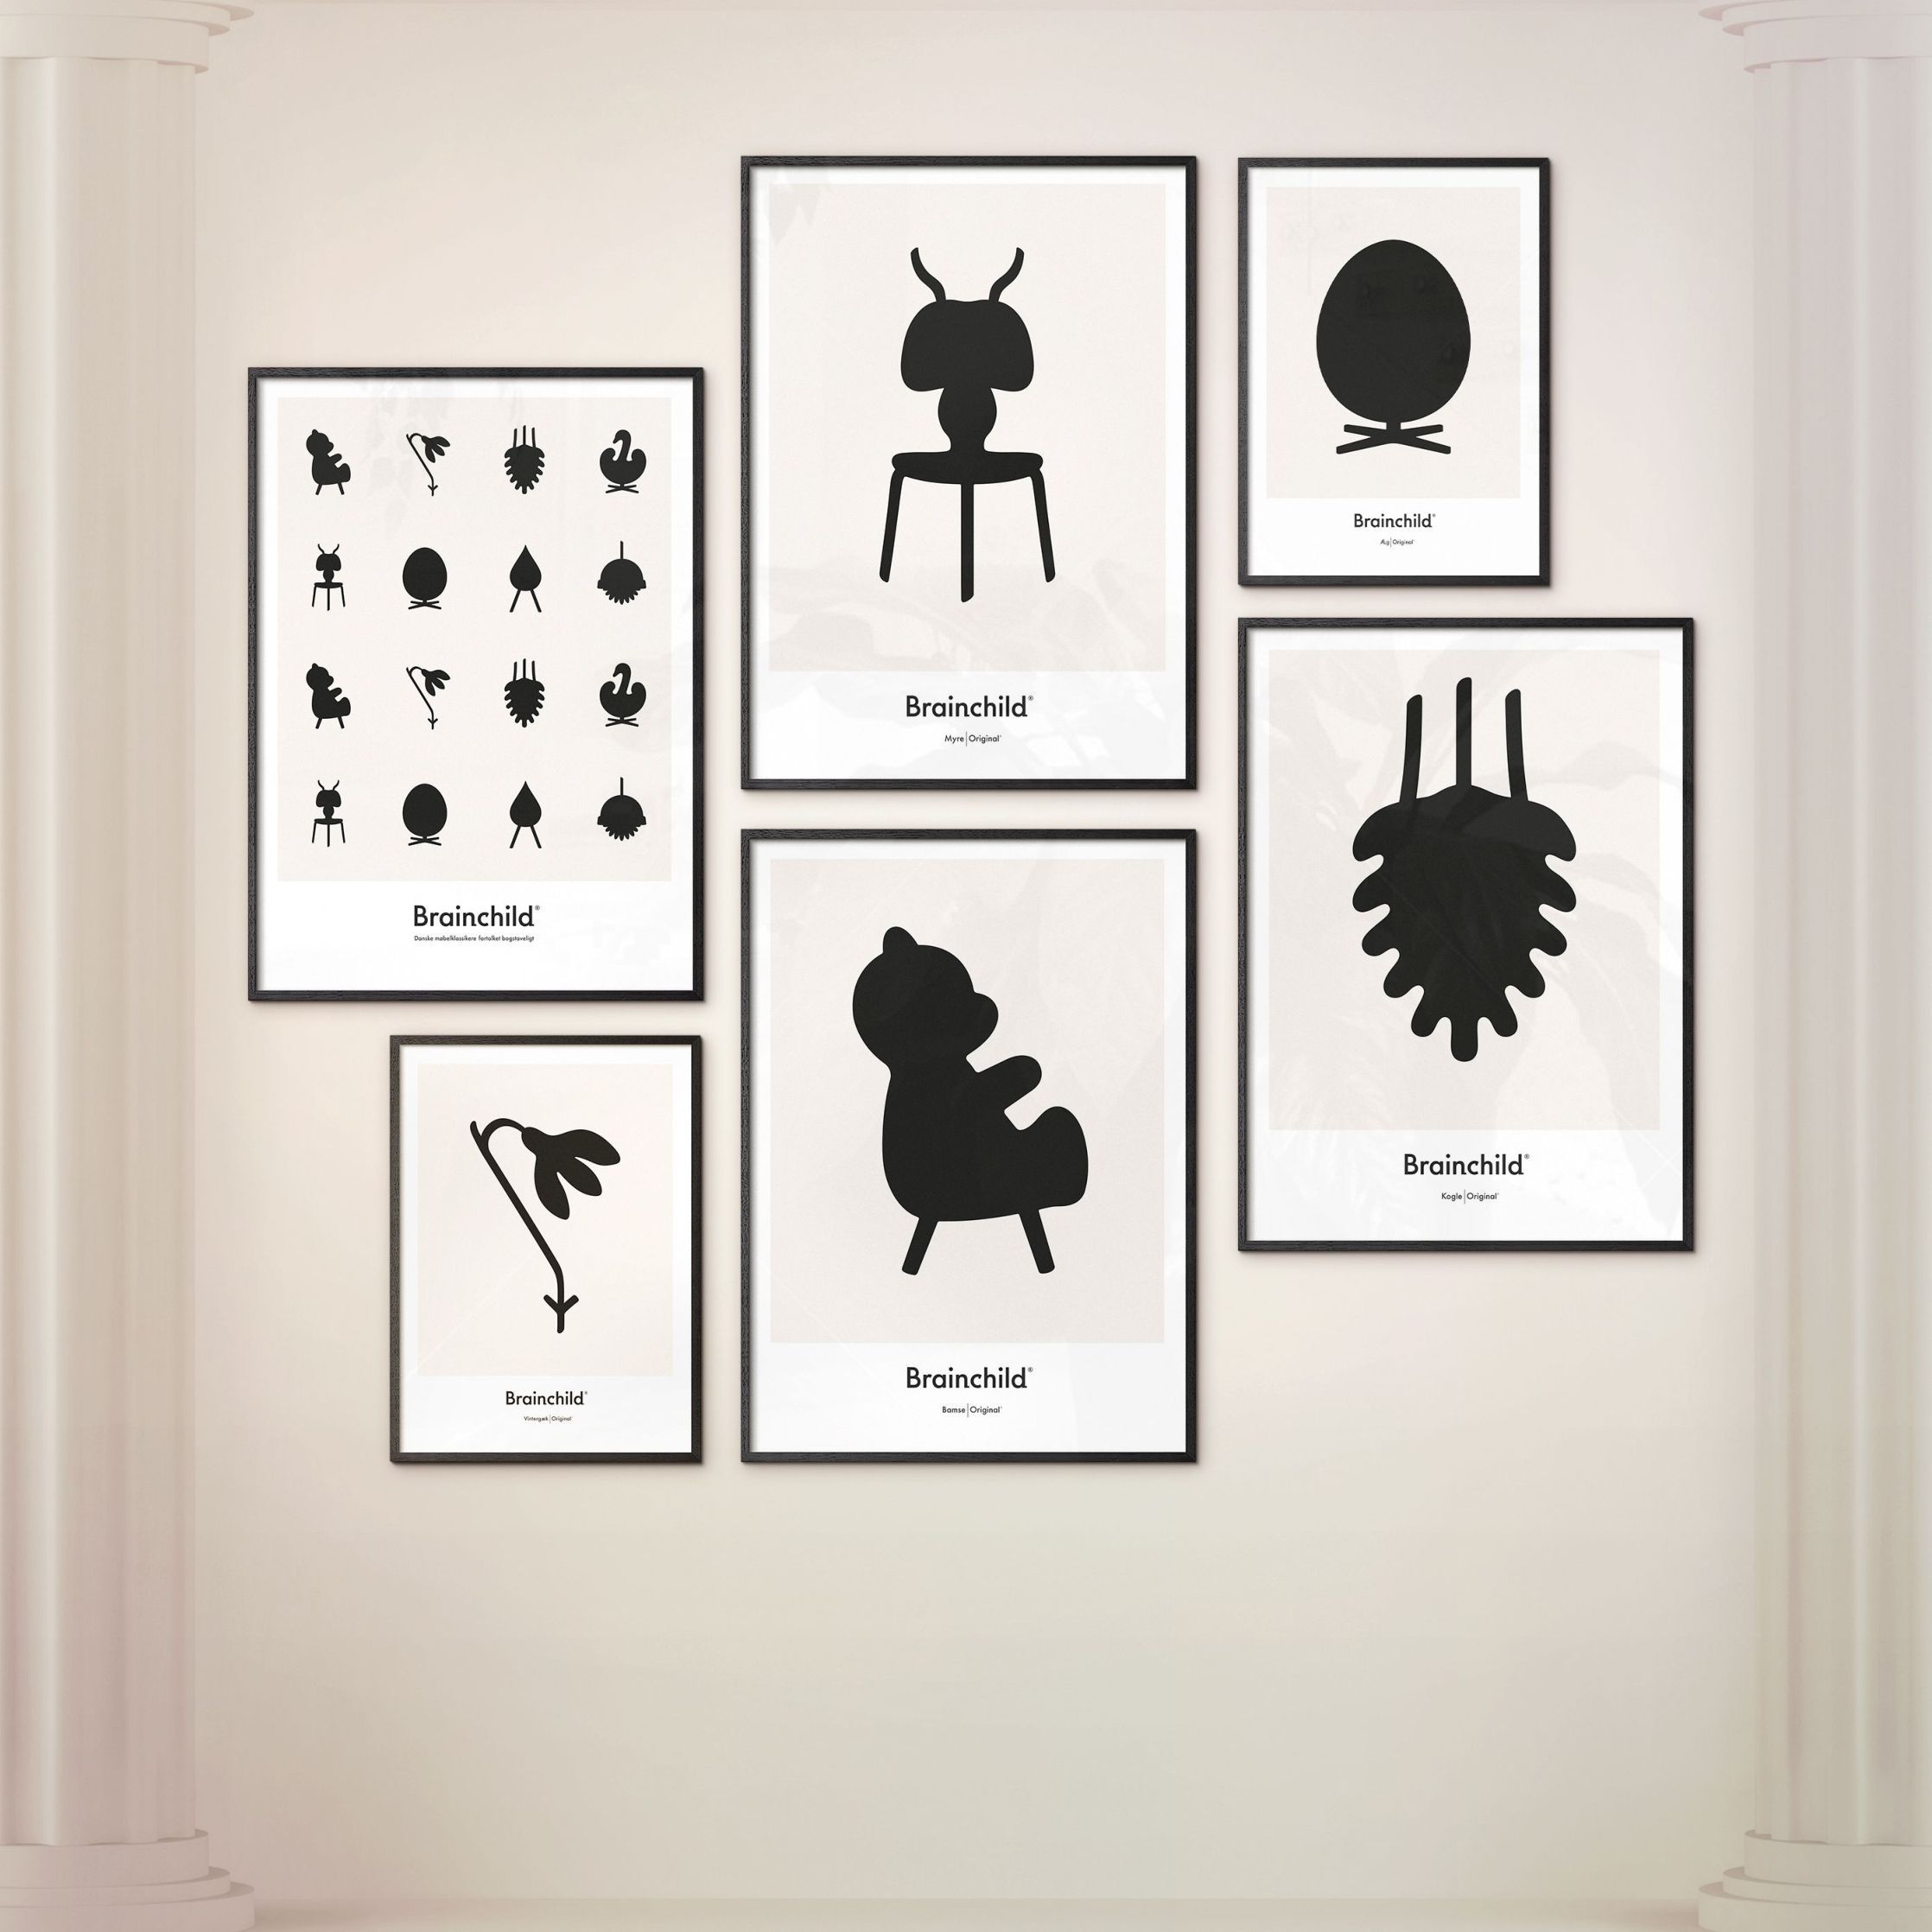 Brainchild Pine Cone Design Icon Poster, Frame Made Of Black Lacquered Wood 50x70 Cm, Grey